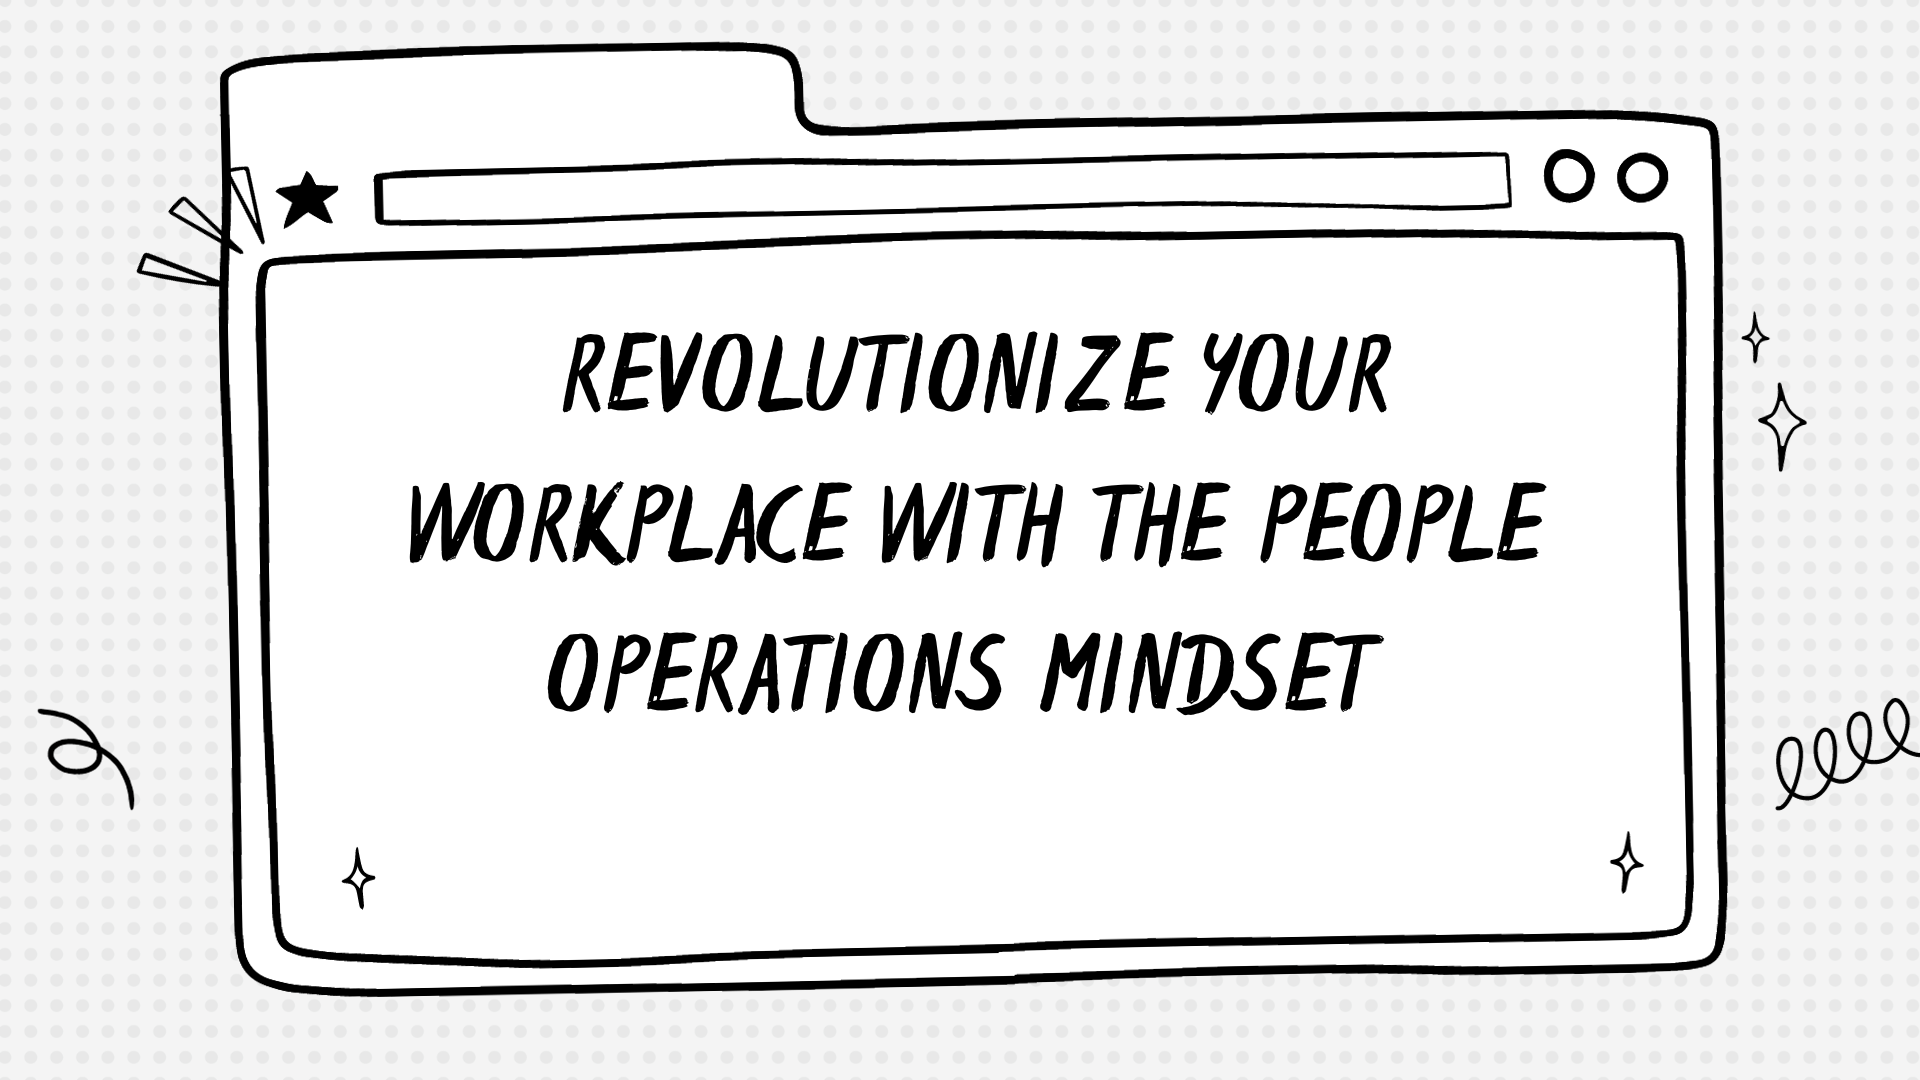 Revolutionize Your Workplace with the People Operations Mindset